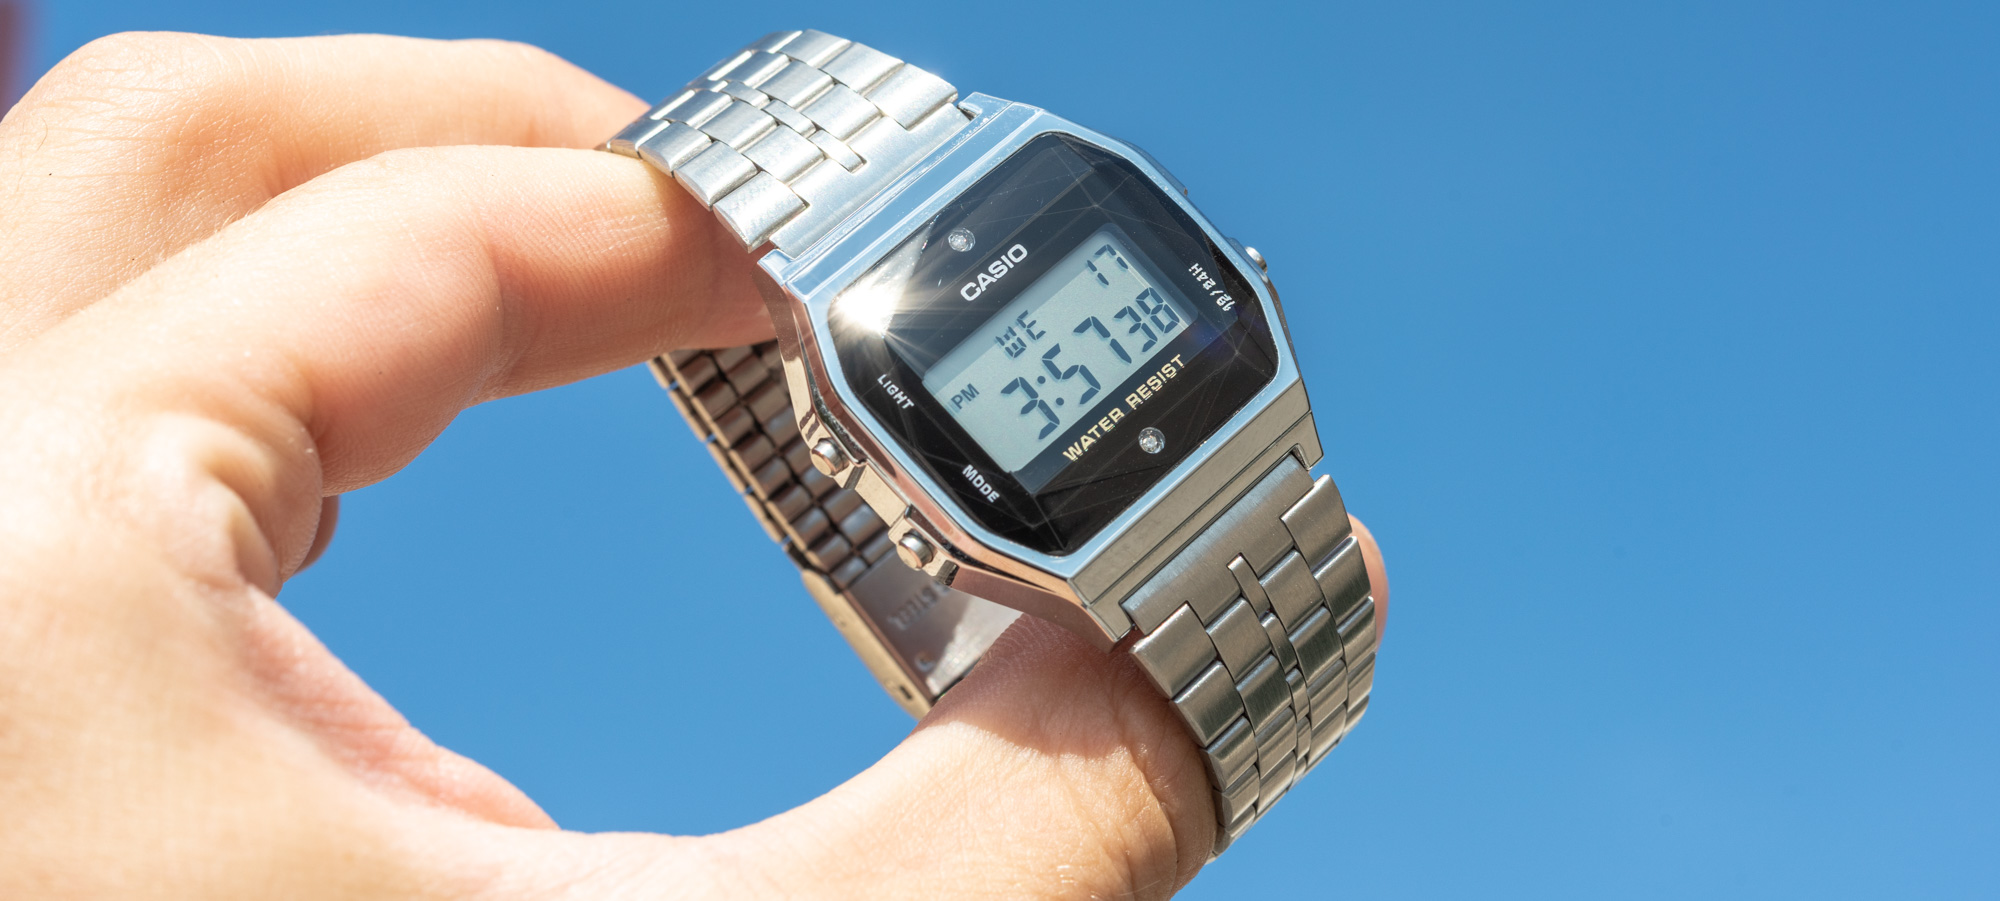 Casio A159WAD-1D Watch Review: Buy The Cheapest-Ever Diamond-Set Watch? |